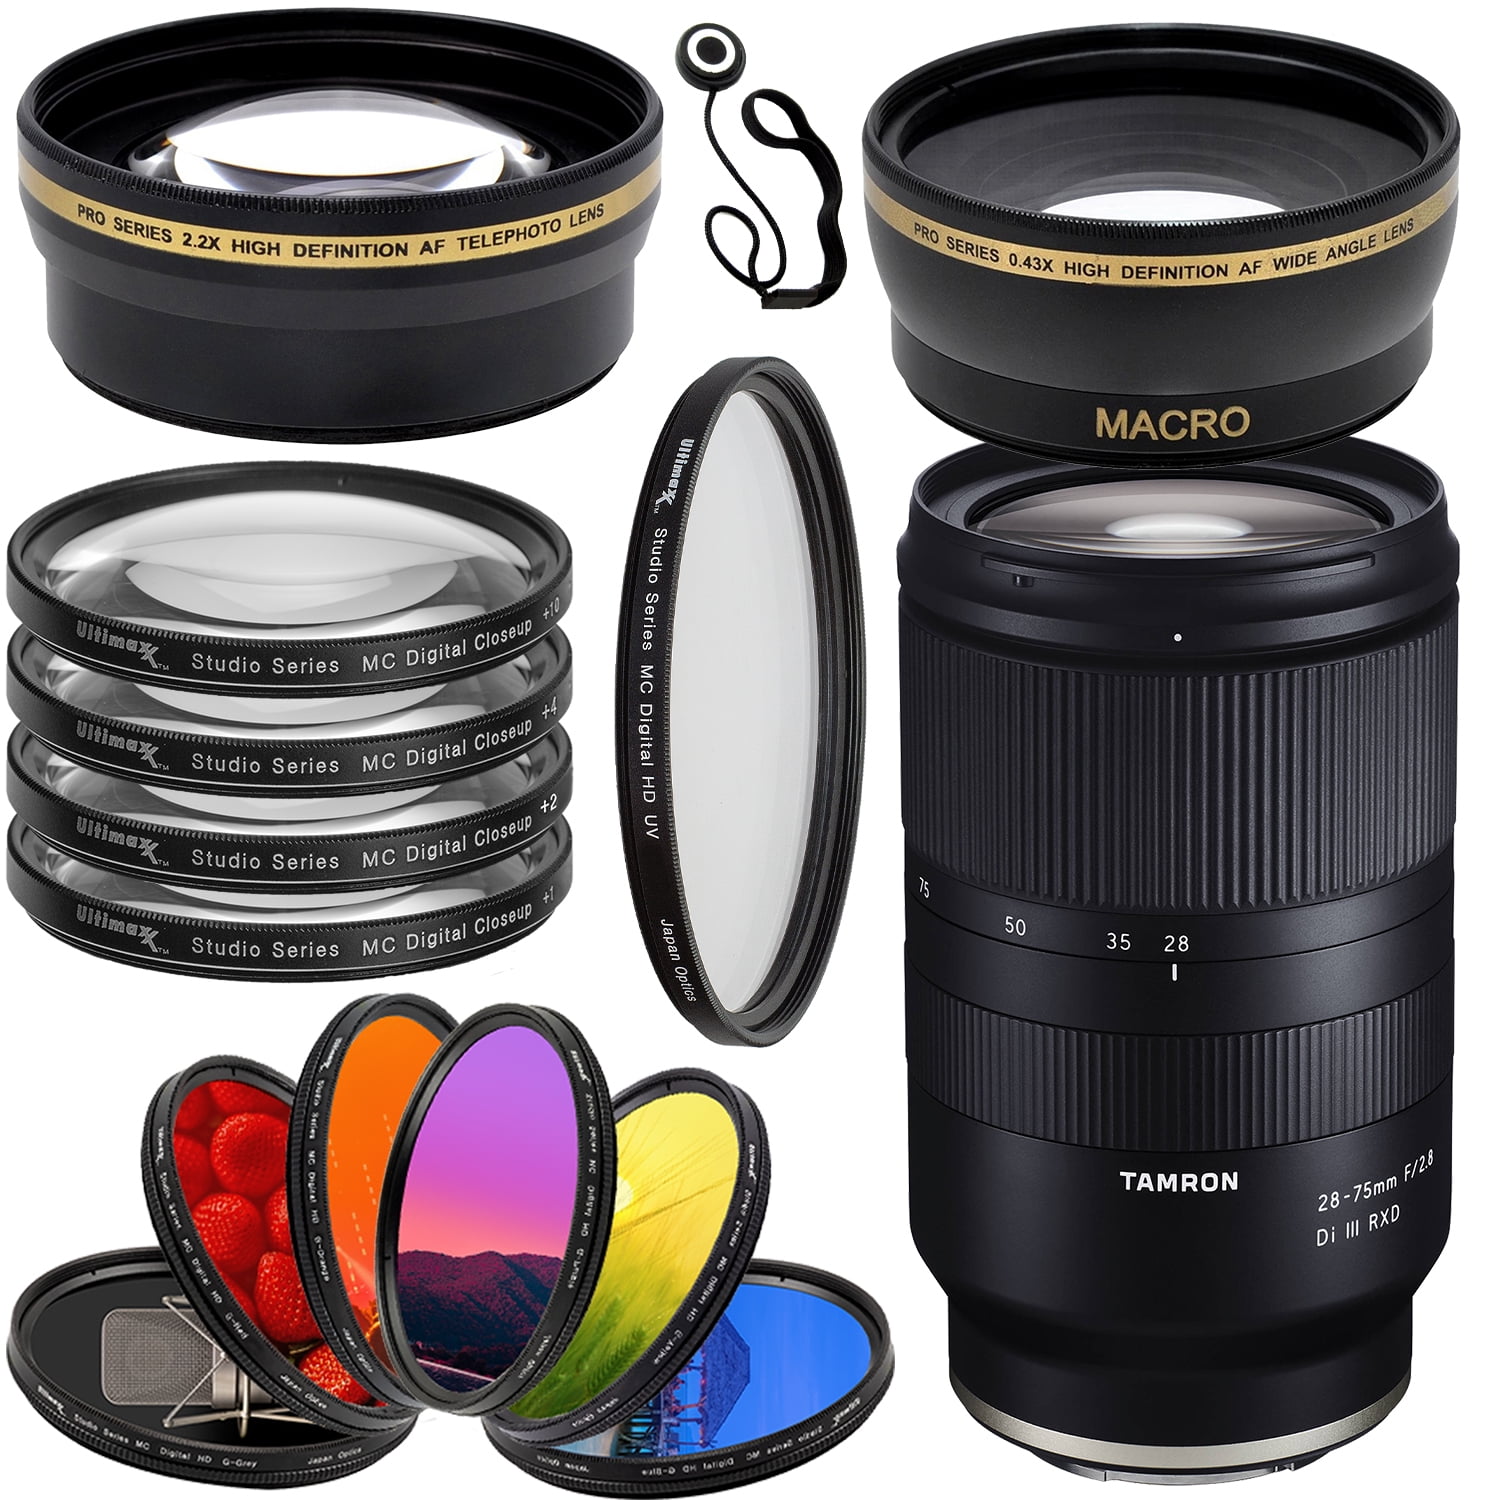 Tamron 28-75mm f/2.8 Di III RXD Lens for Sony E with Essential